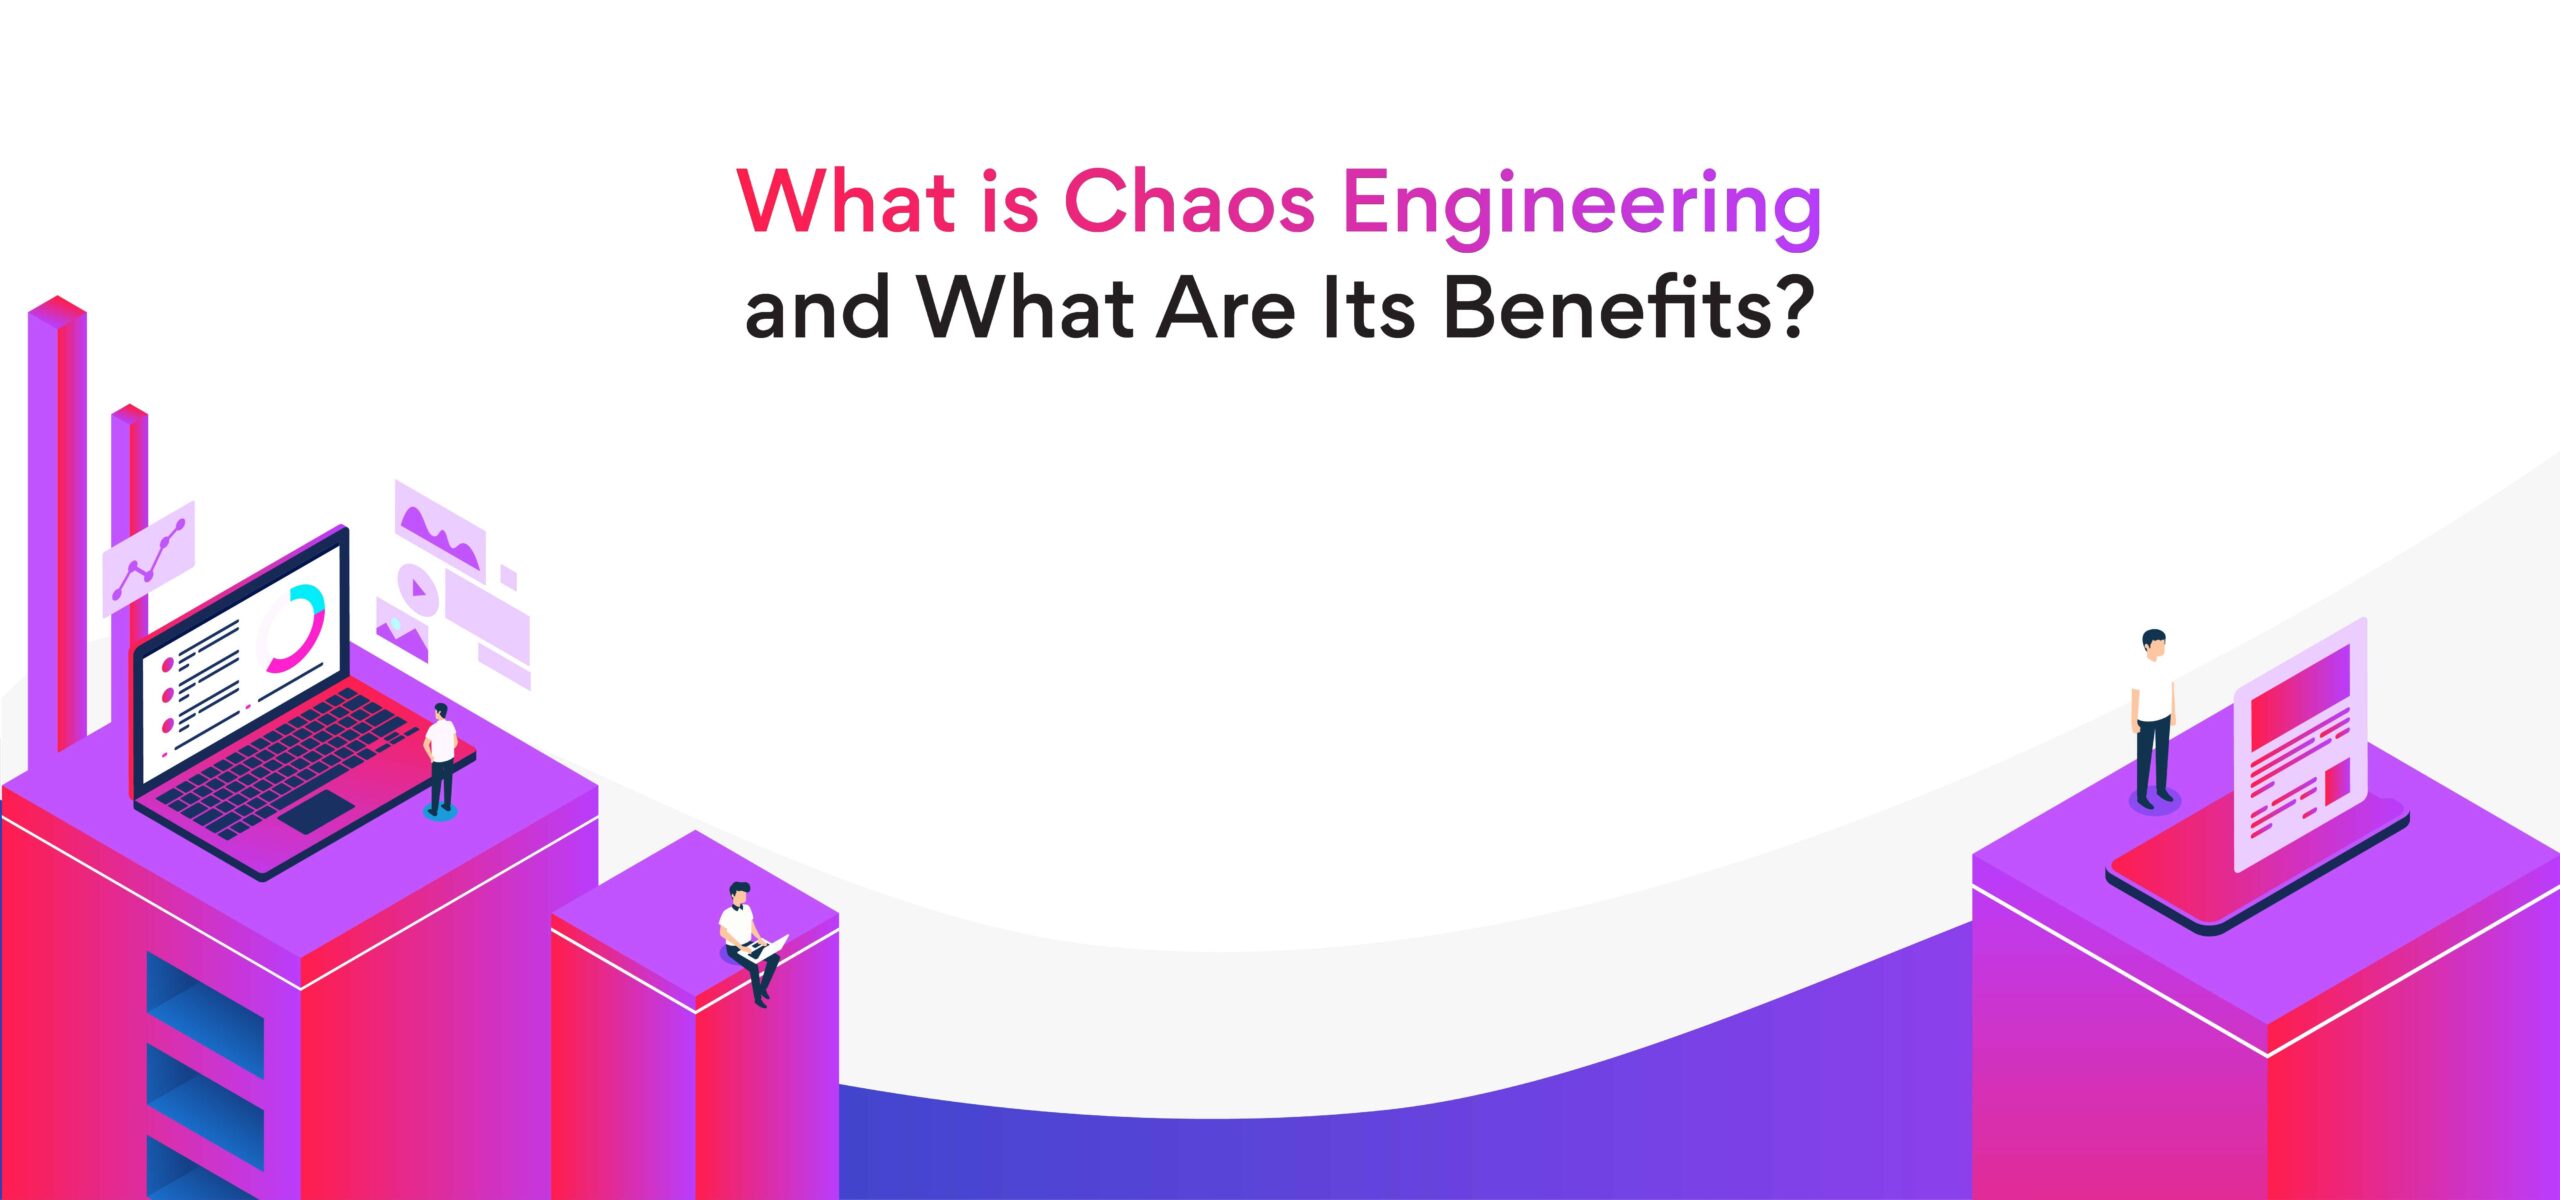 What is Chaos Engineering?